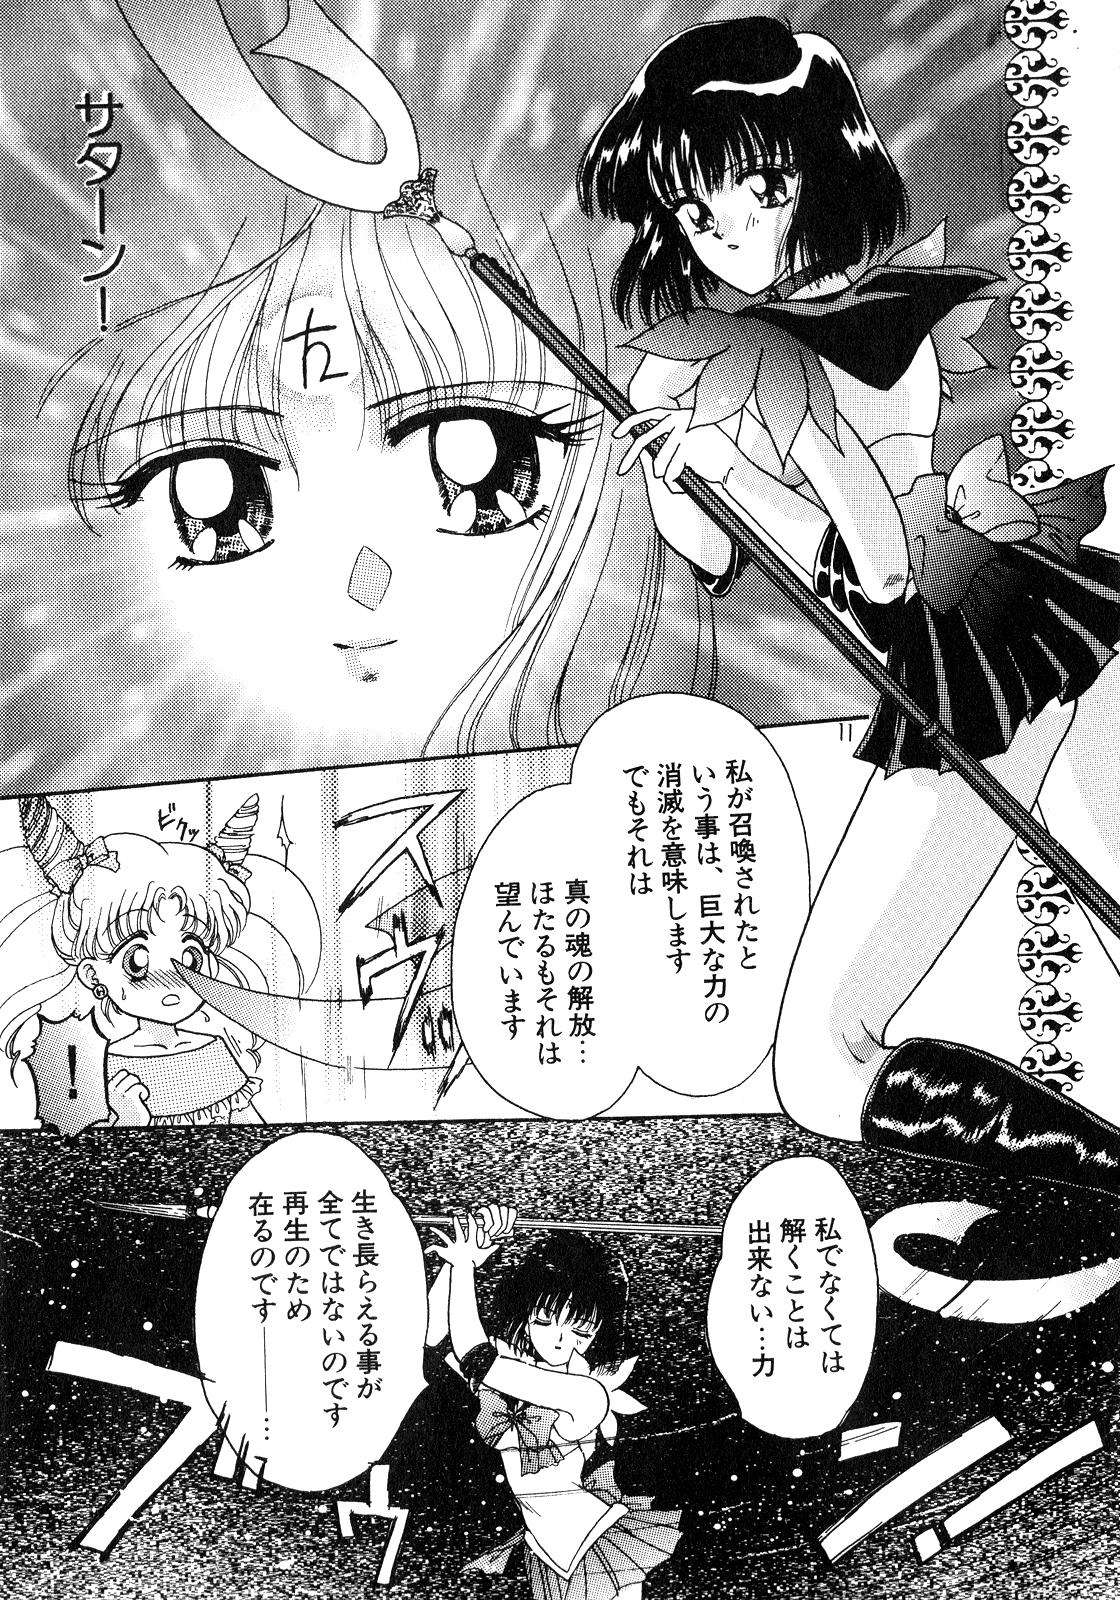 Huge Lunatic Party 8 - Sailor moon Gay Anal - Page 10